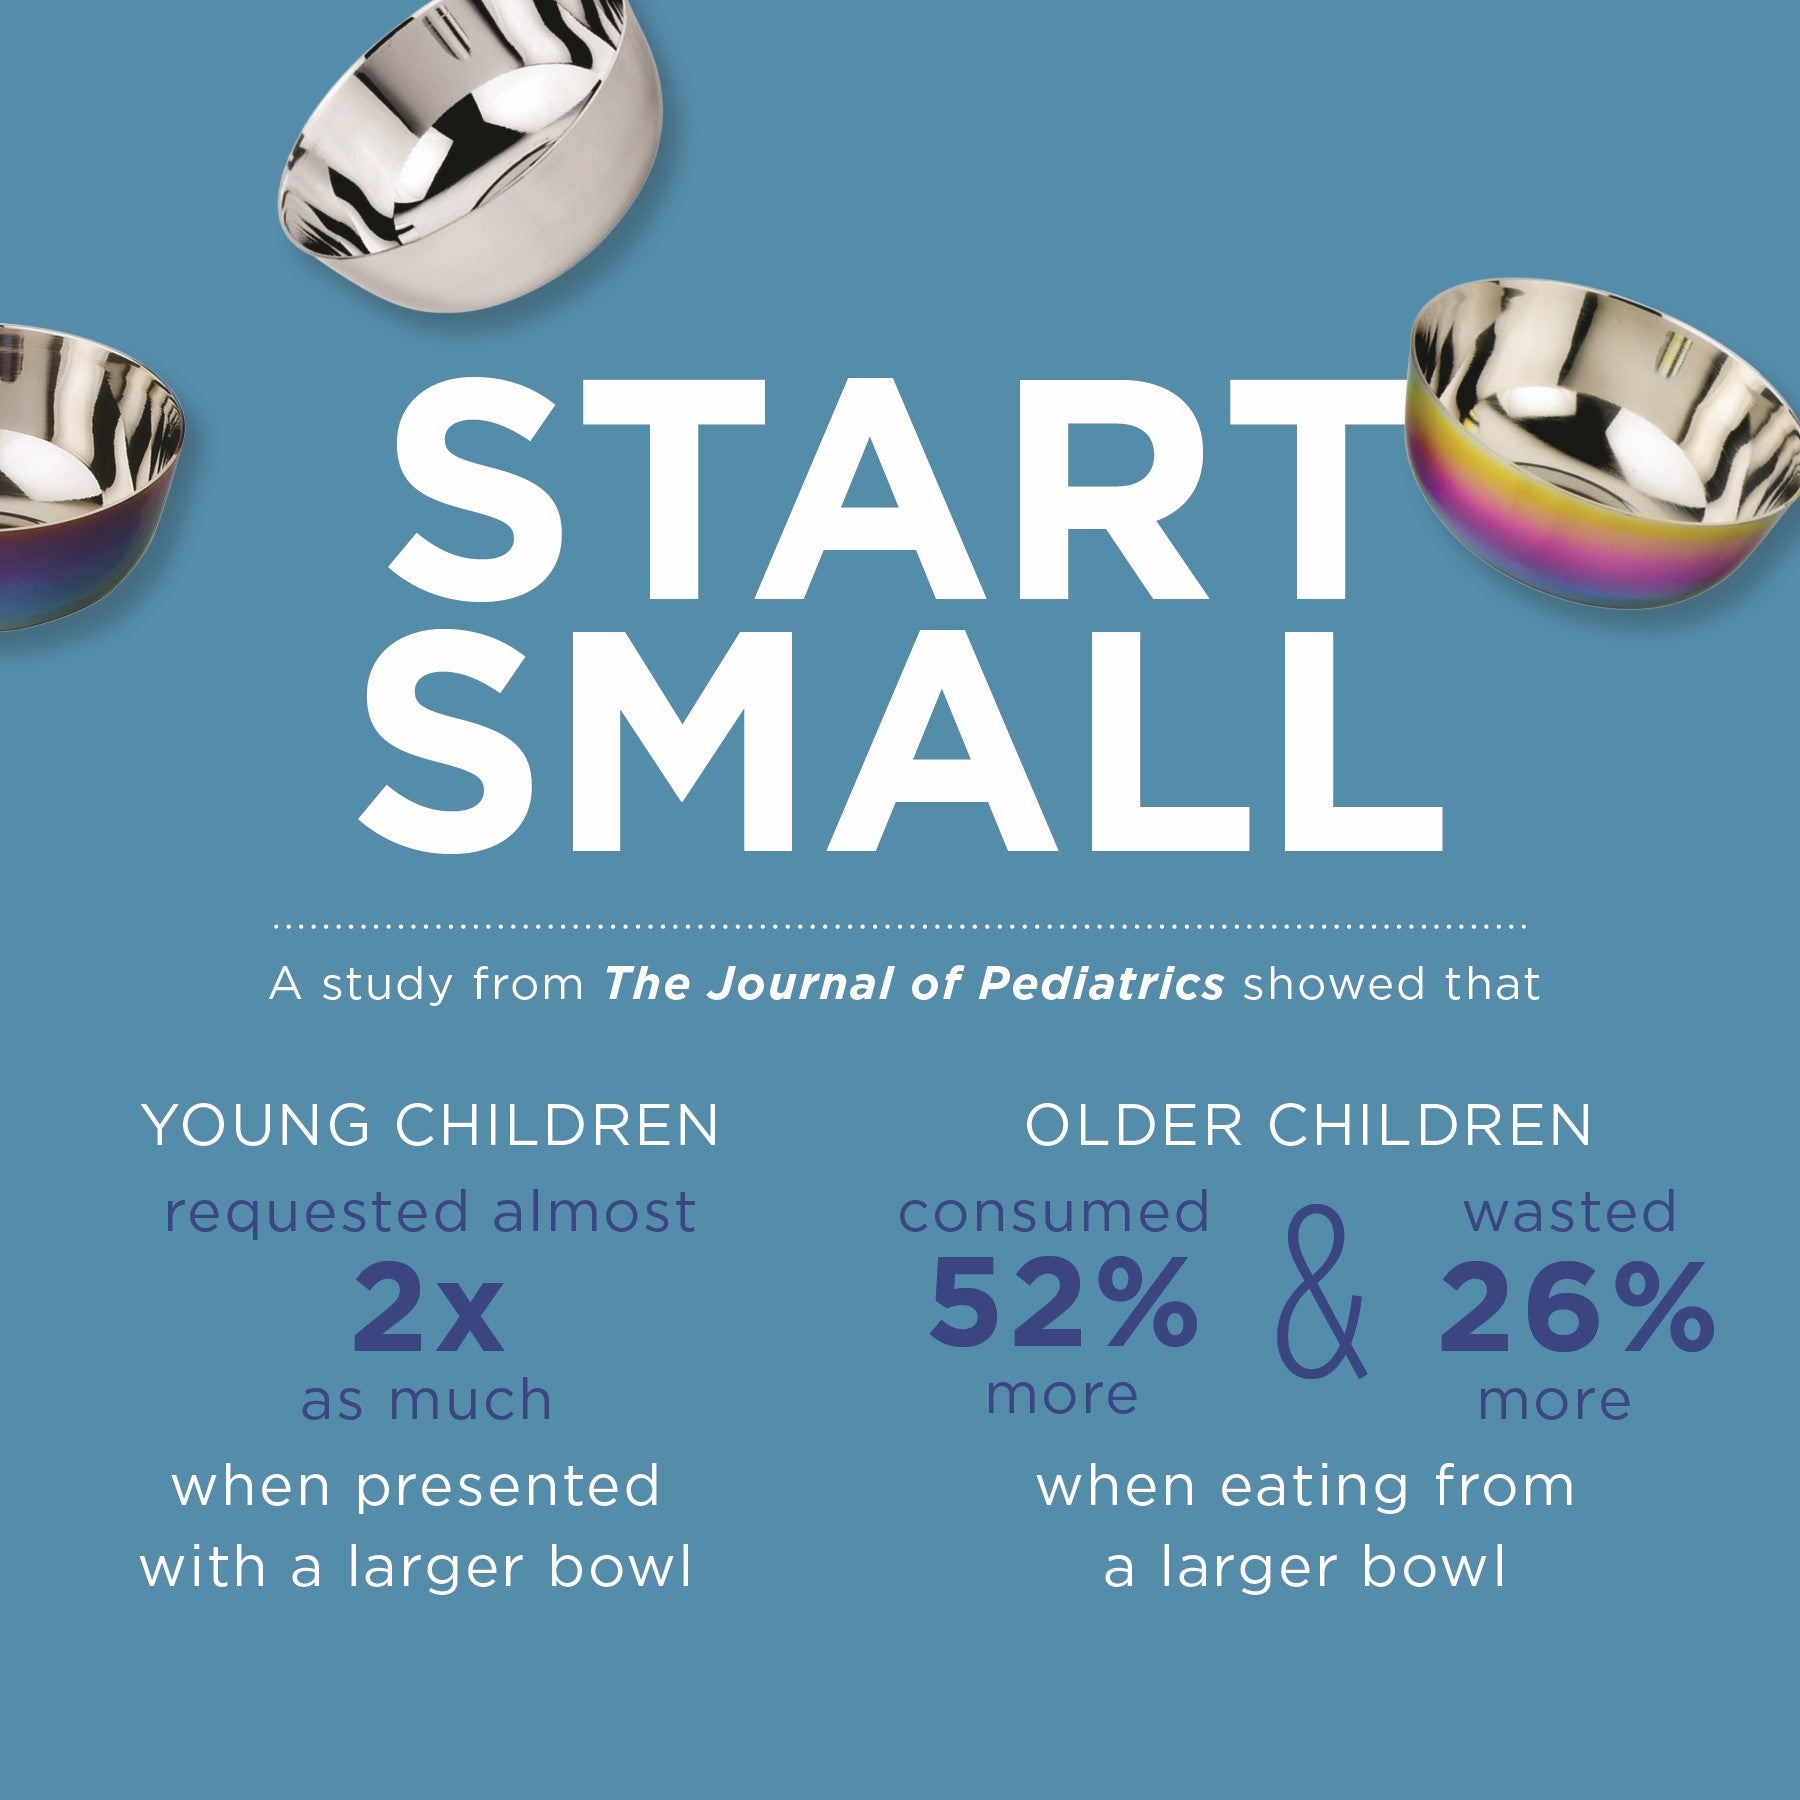 For kids' portion sizes start small. Young children requested twice as much when presented with a larger bowl. Older children consumed 52% more when eating from a larger bowl. 